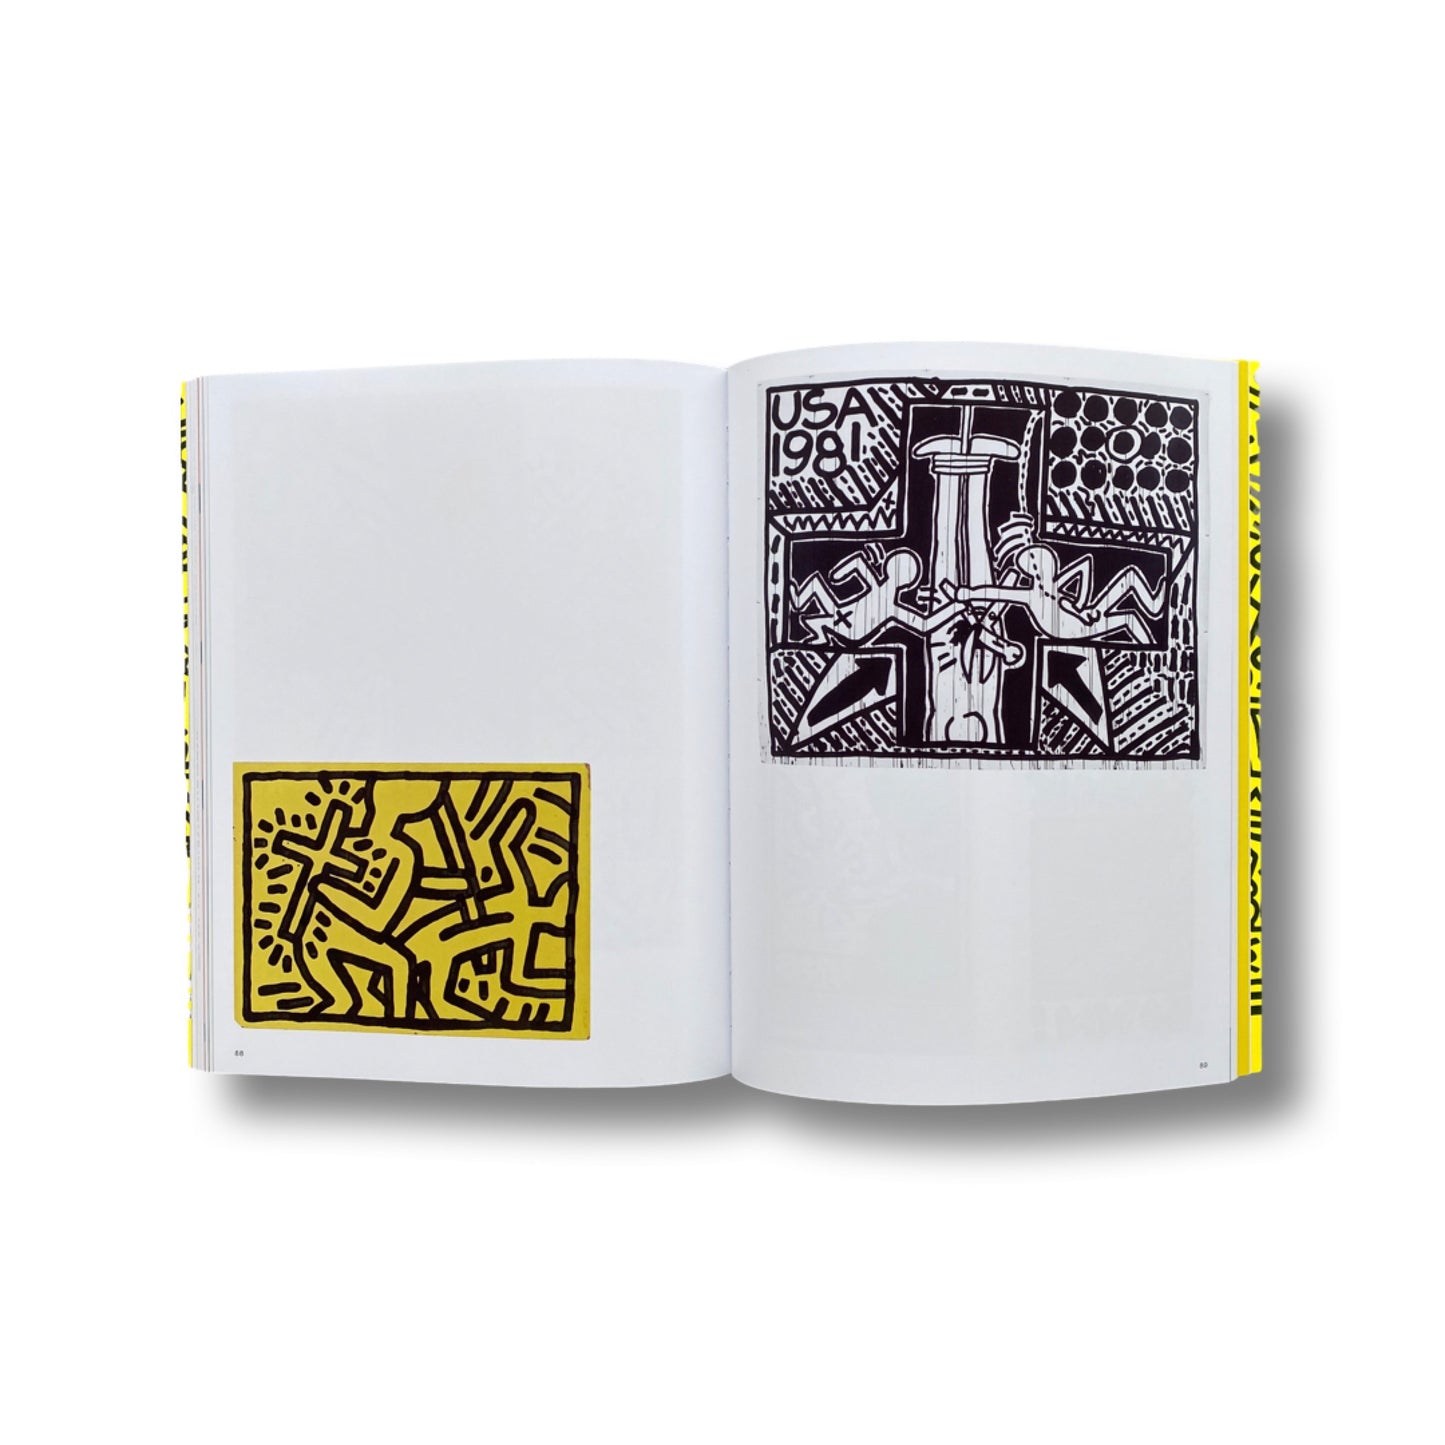 Keith Haring by Darren Pih